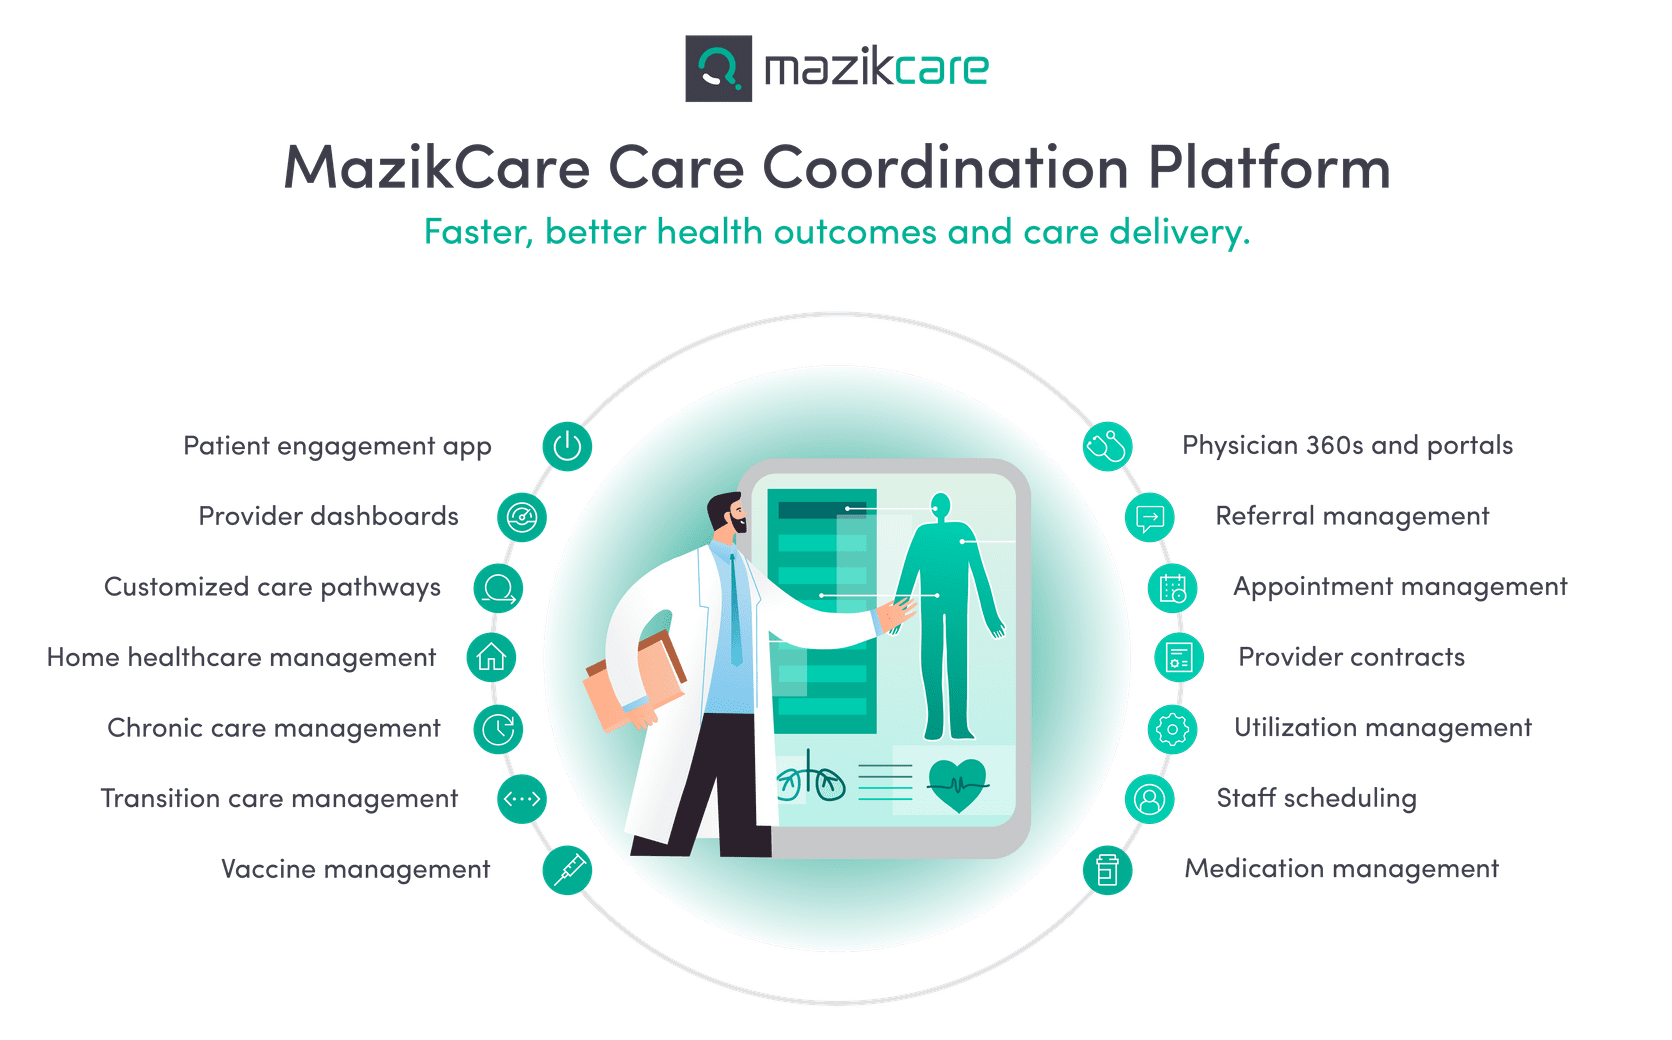 MazikCare Care Coordination Platform: Faster, Better health outcomes and care delivery. Components: Patient engagement app, provider dashboards, customized care pathways, healthcare management, chronic care management, transition care management, vaccine management, Physician 360s and portals, referral management, appointment management, provider contracts, utilization management, staff scheduling, medication management